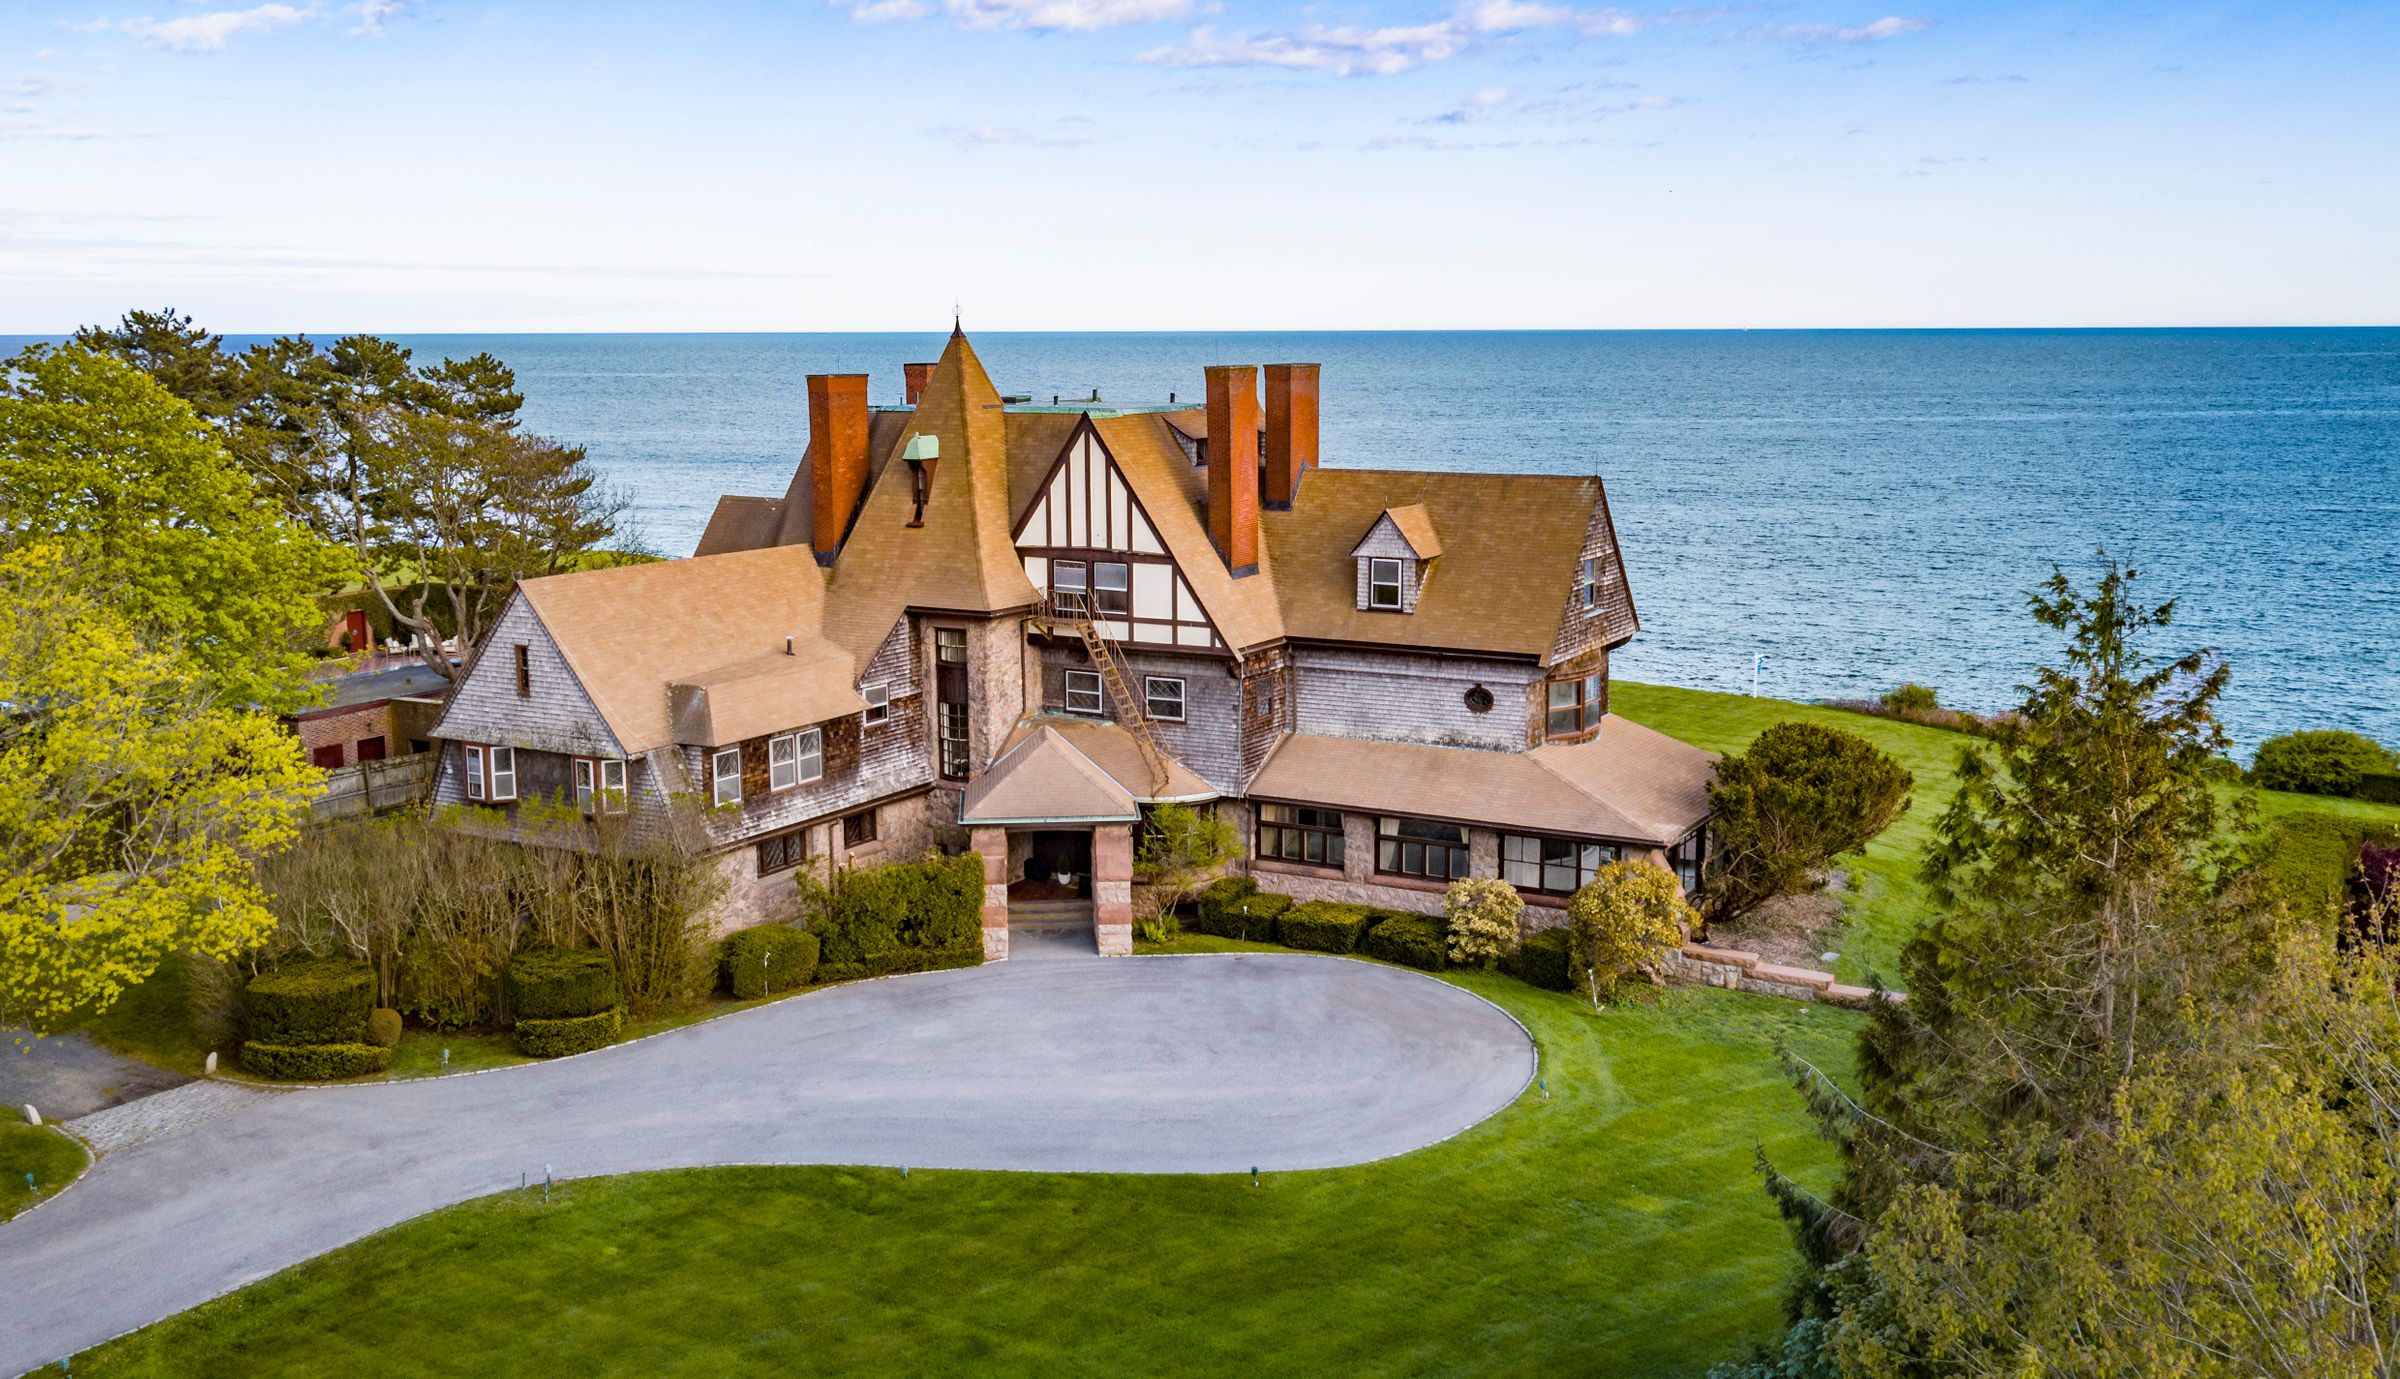 House Lust: The 5 Most Expensive Homes Sold In RI In 2019